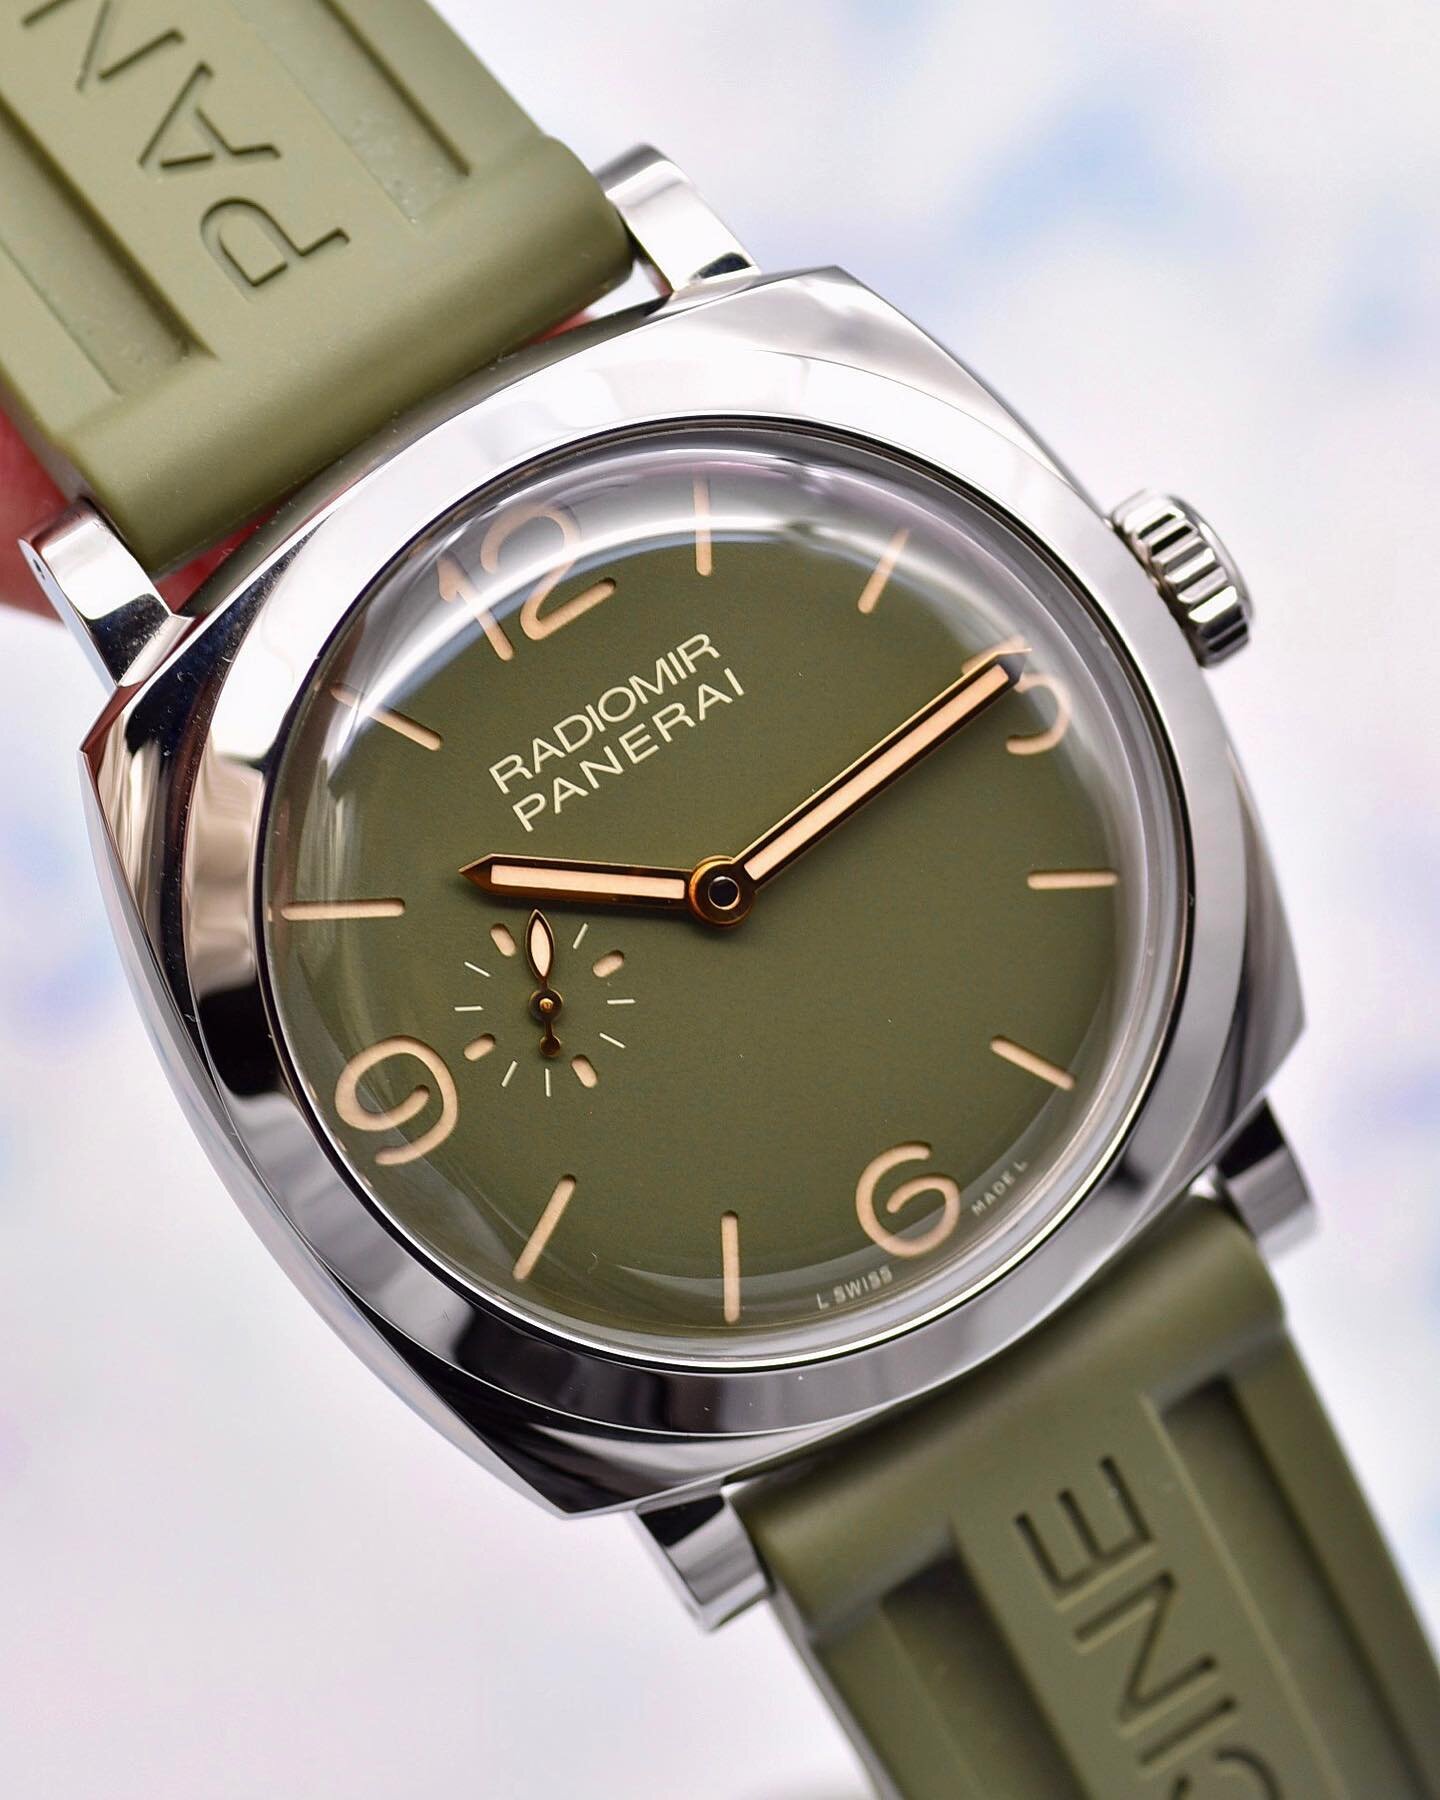 Introducing the Panerai Radiomir Verde Militare PAM995 💚 
Released to Panerai boutiques in 2019, this has quickly become one of the most popular Radiomirs due its beautiful and sleek design. 

Available now on fernotime.com ✅ 

#panerai #pam995

 #p